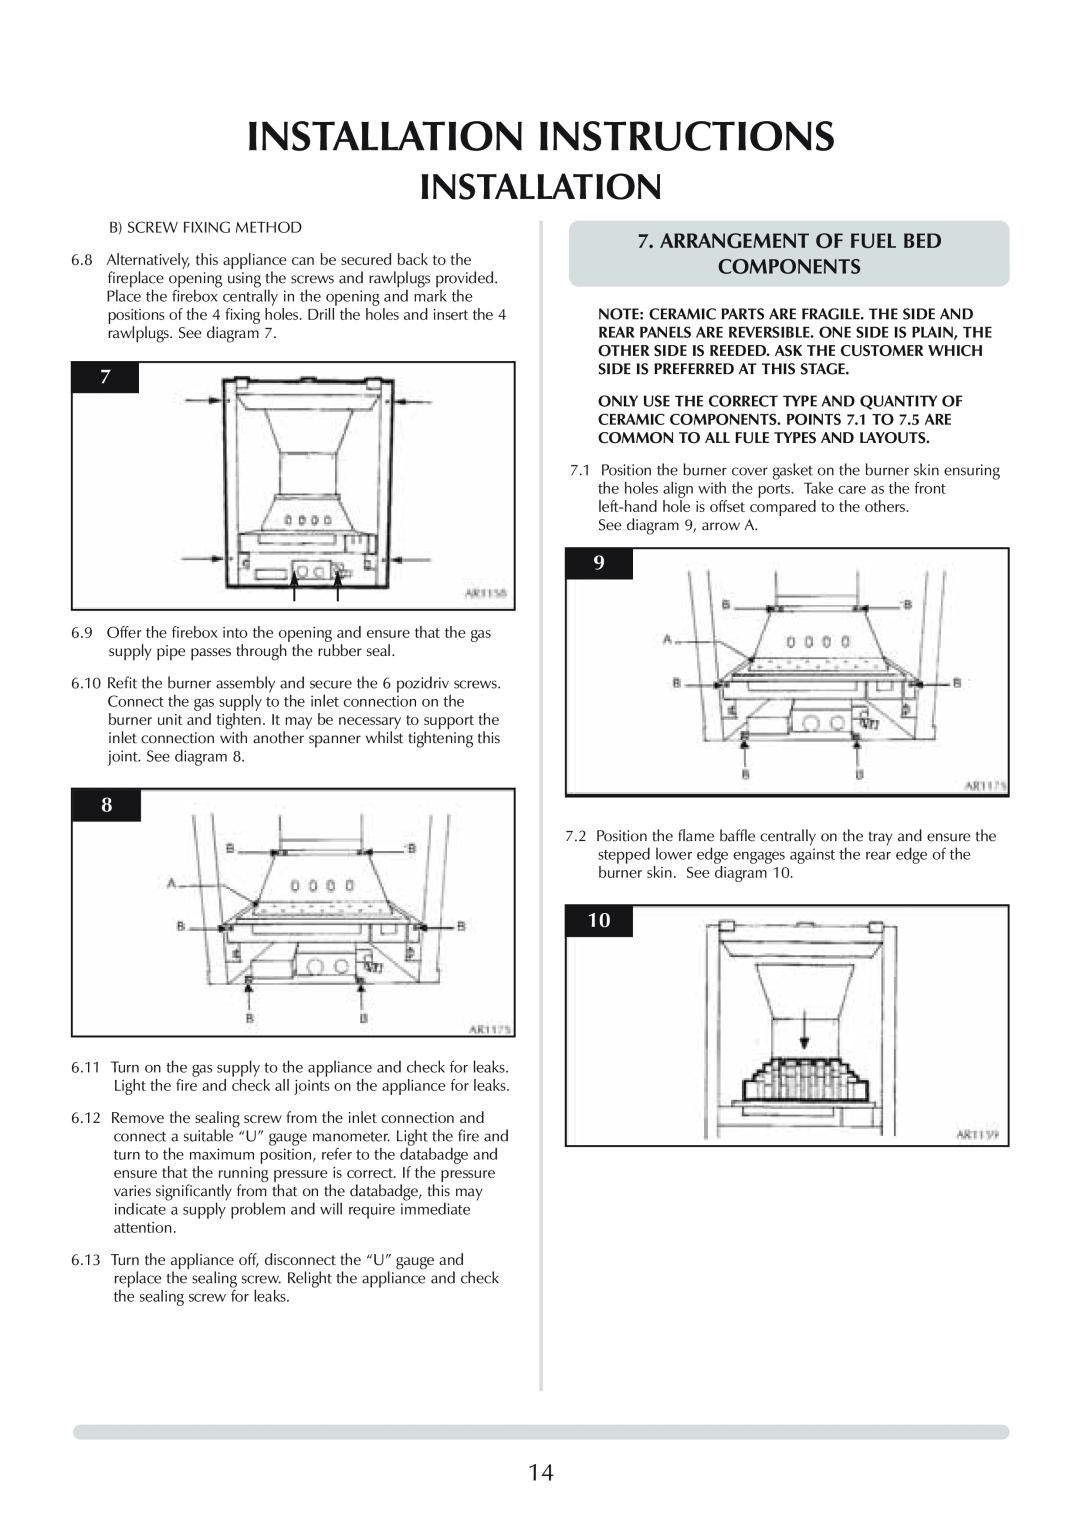 Stovax Logic Hotbox & Convector Fire Installation Instructions, Arrangement Of Fuel Bed Components, Bscrew Fixing Method 